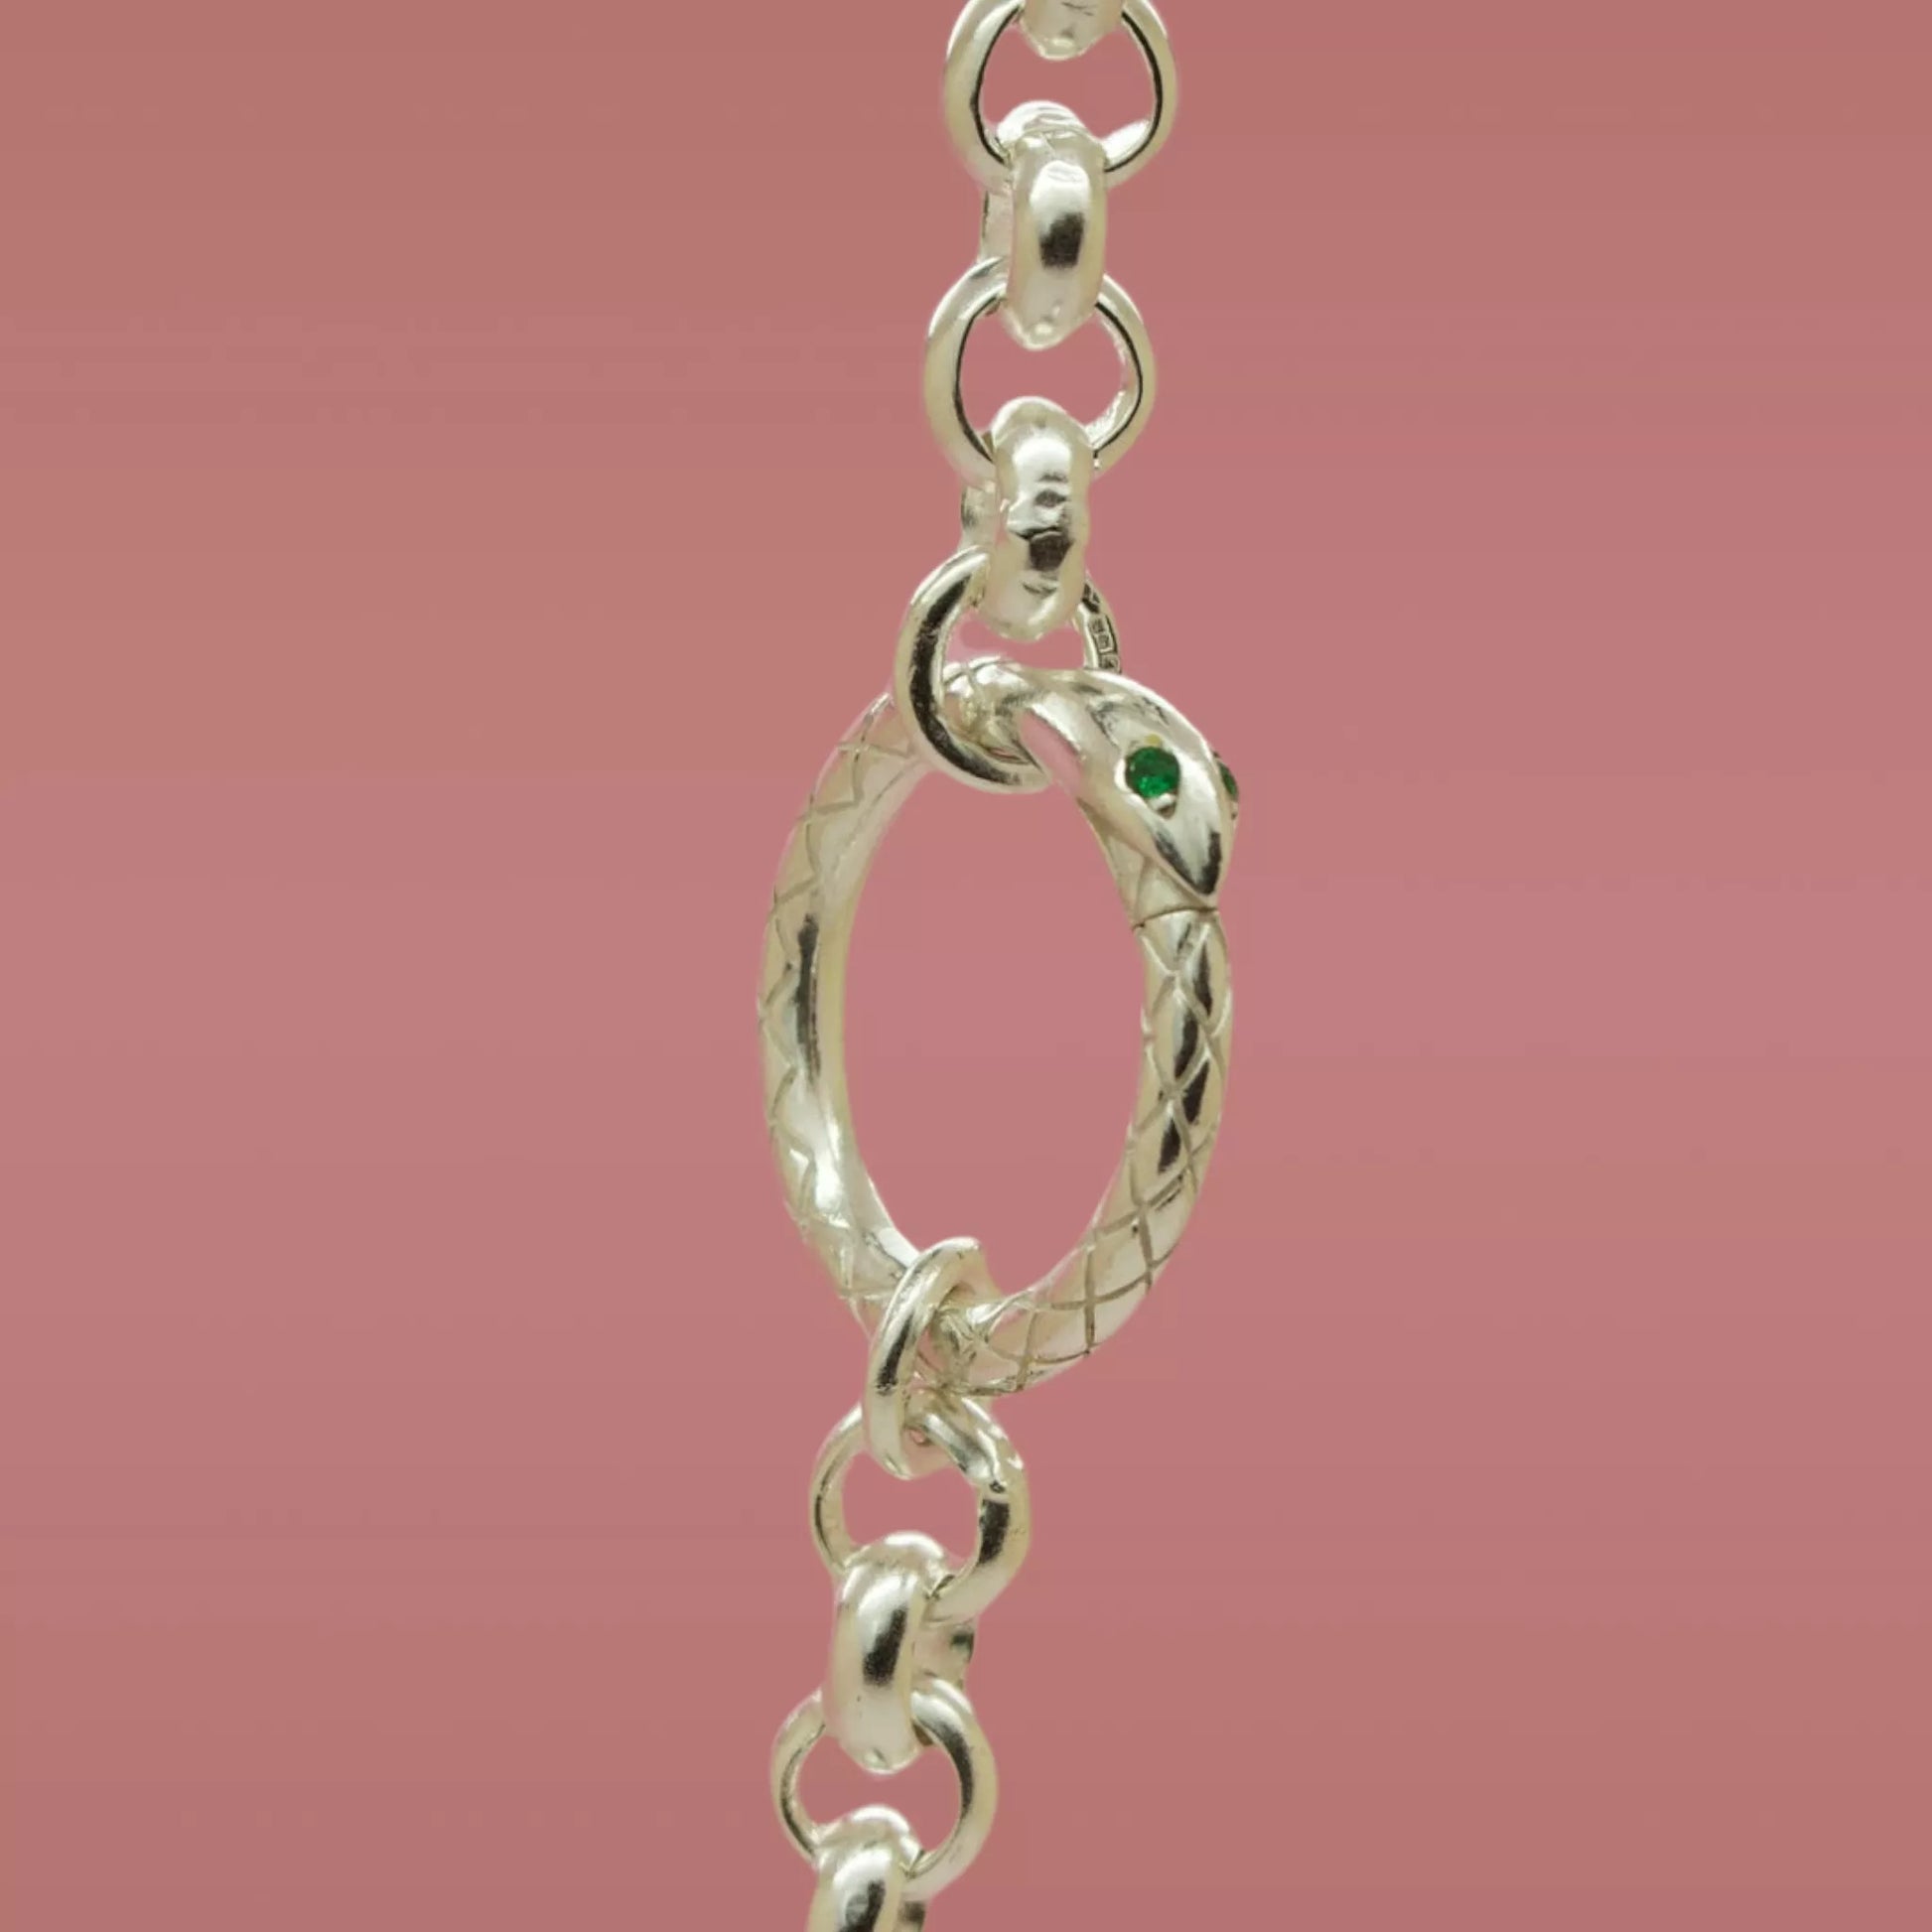 Ready To Ship - 'Serpent' Charm Chain, Silver 16 inch, Necklace, The Serpents Club